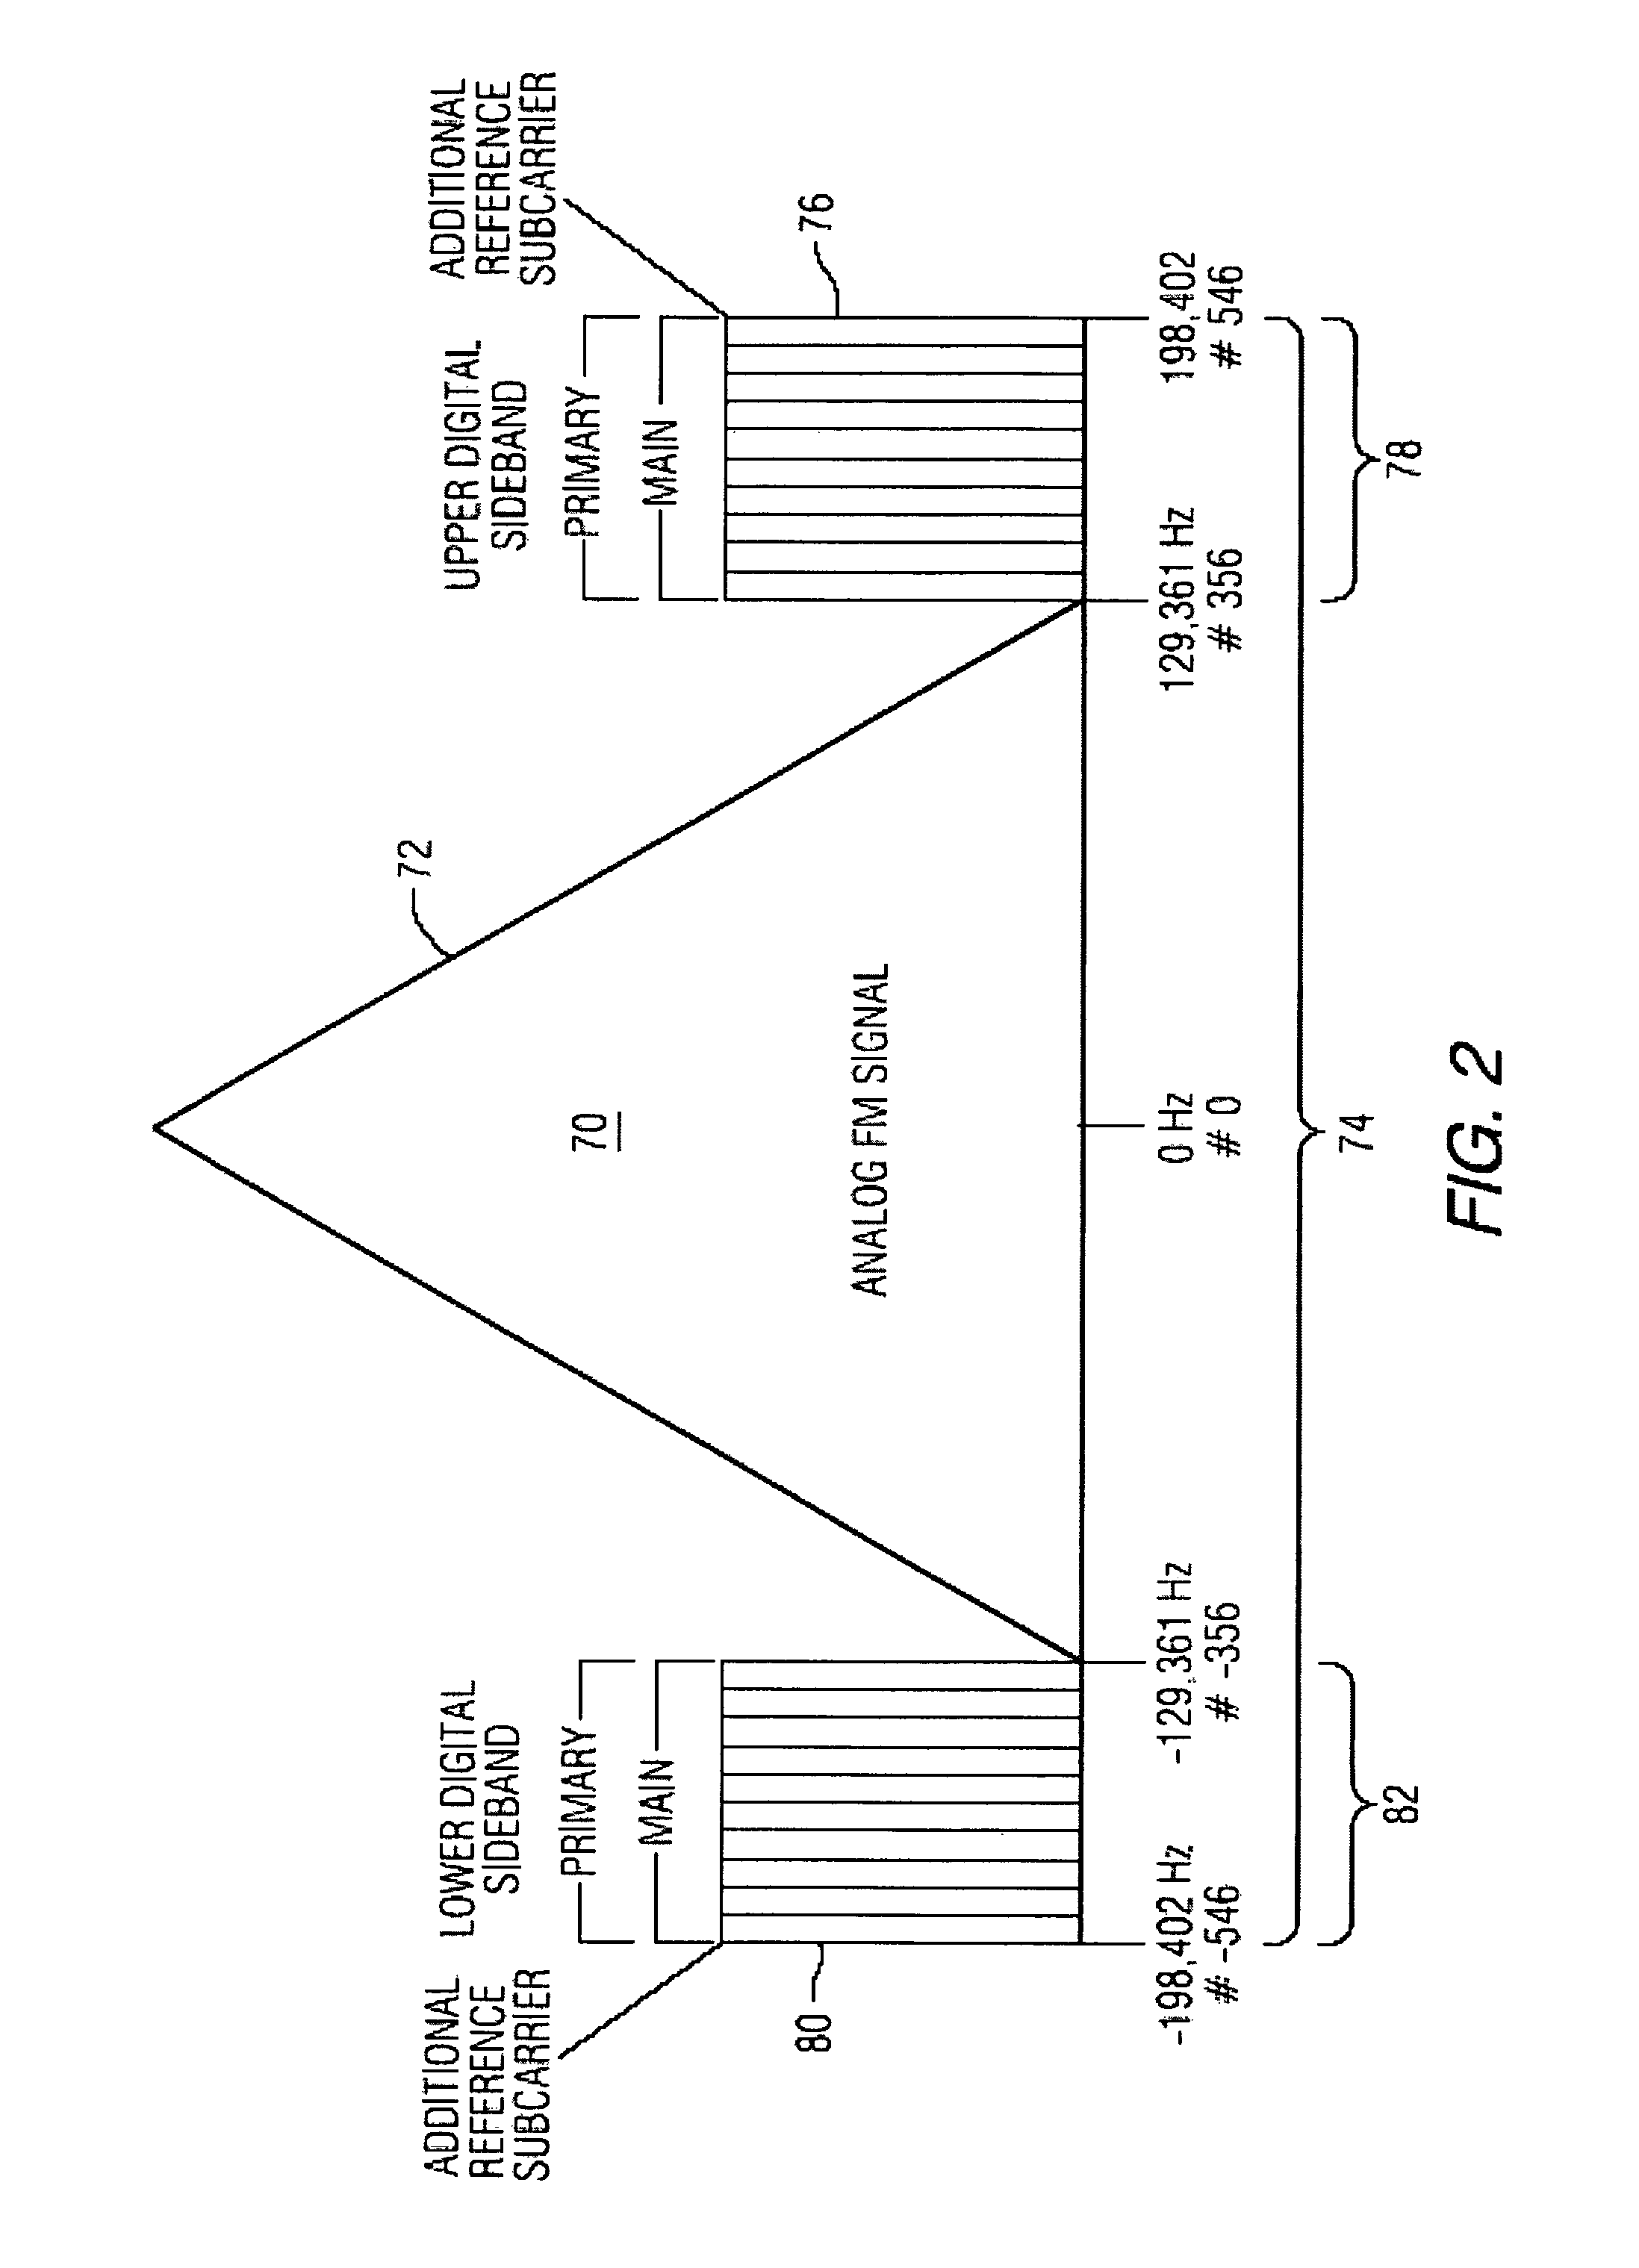 Systems and methods for fine alignment of analog and digital signal pathways